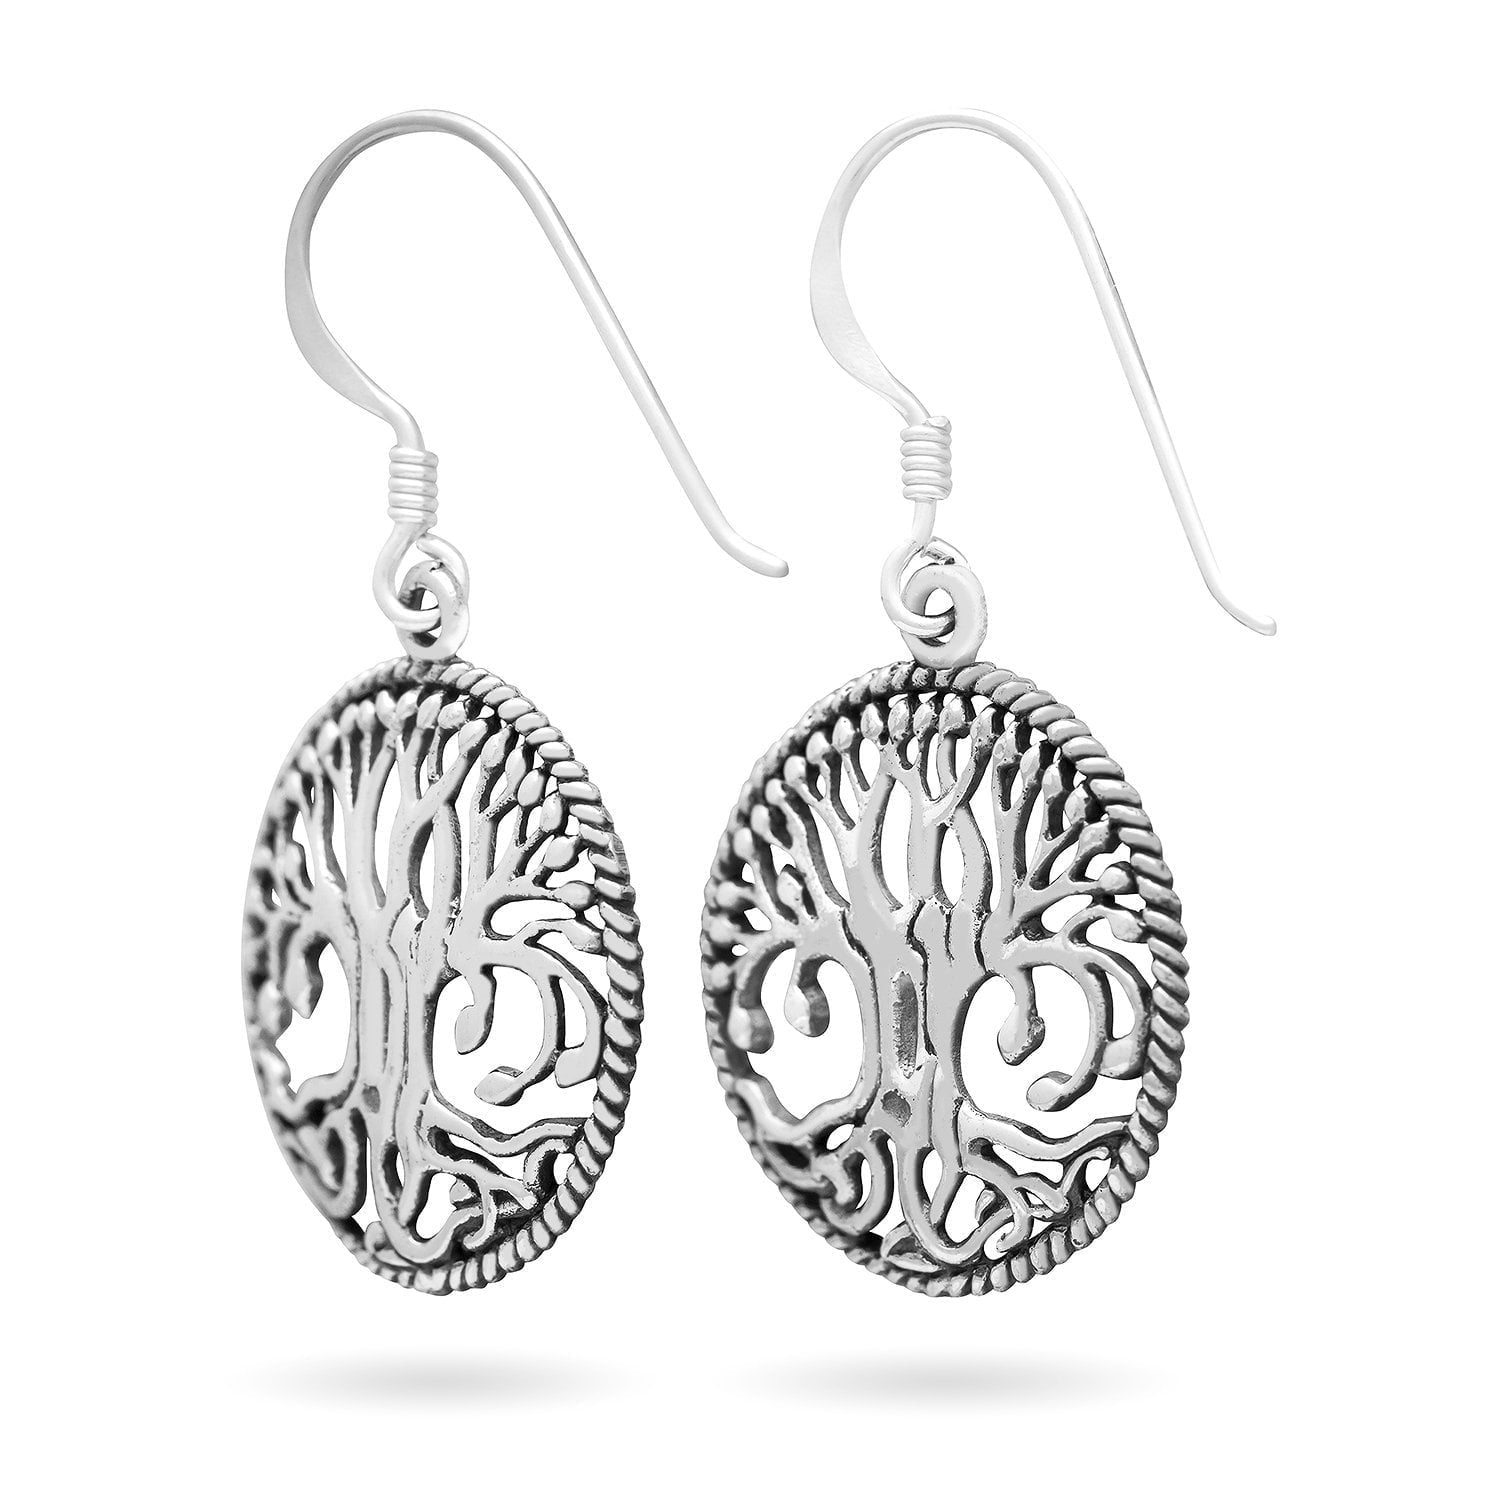 925 Sterling Silver Yggdrasil Norse Tree of Life Viking Jewelry Earrings Set